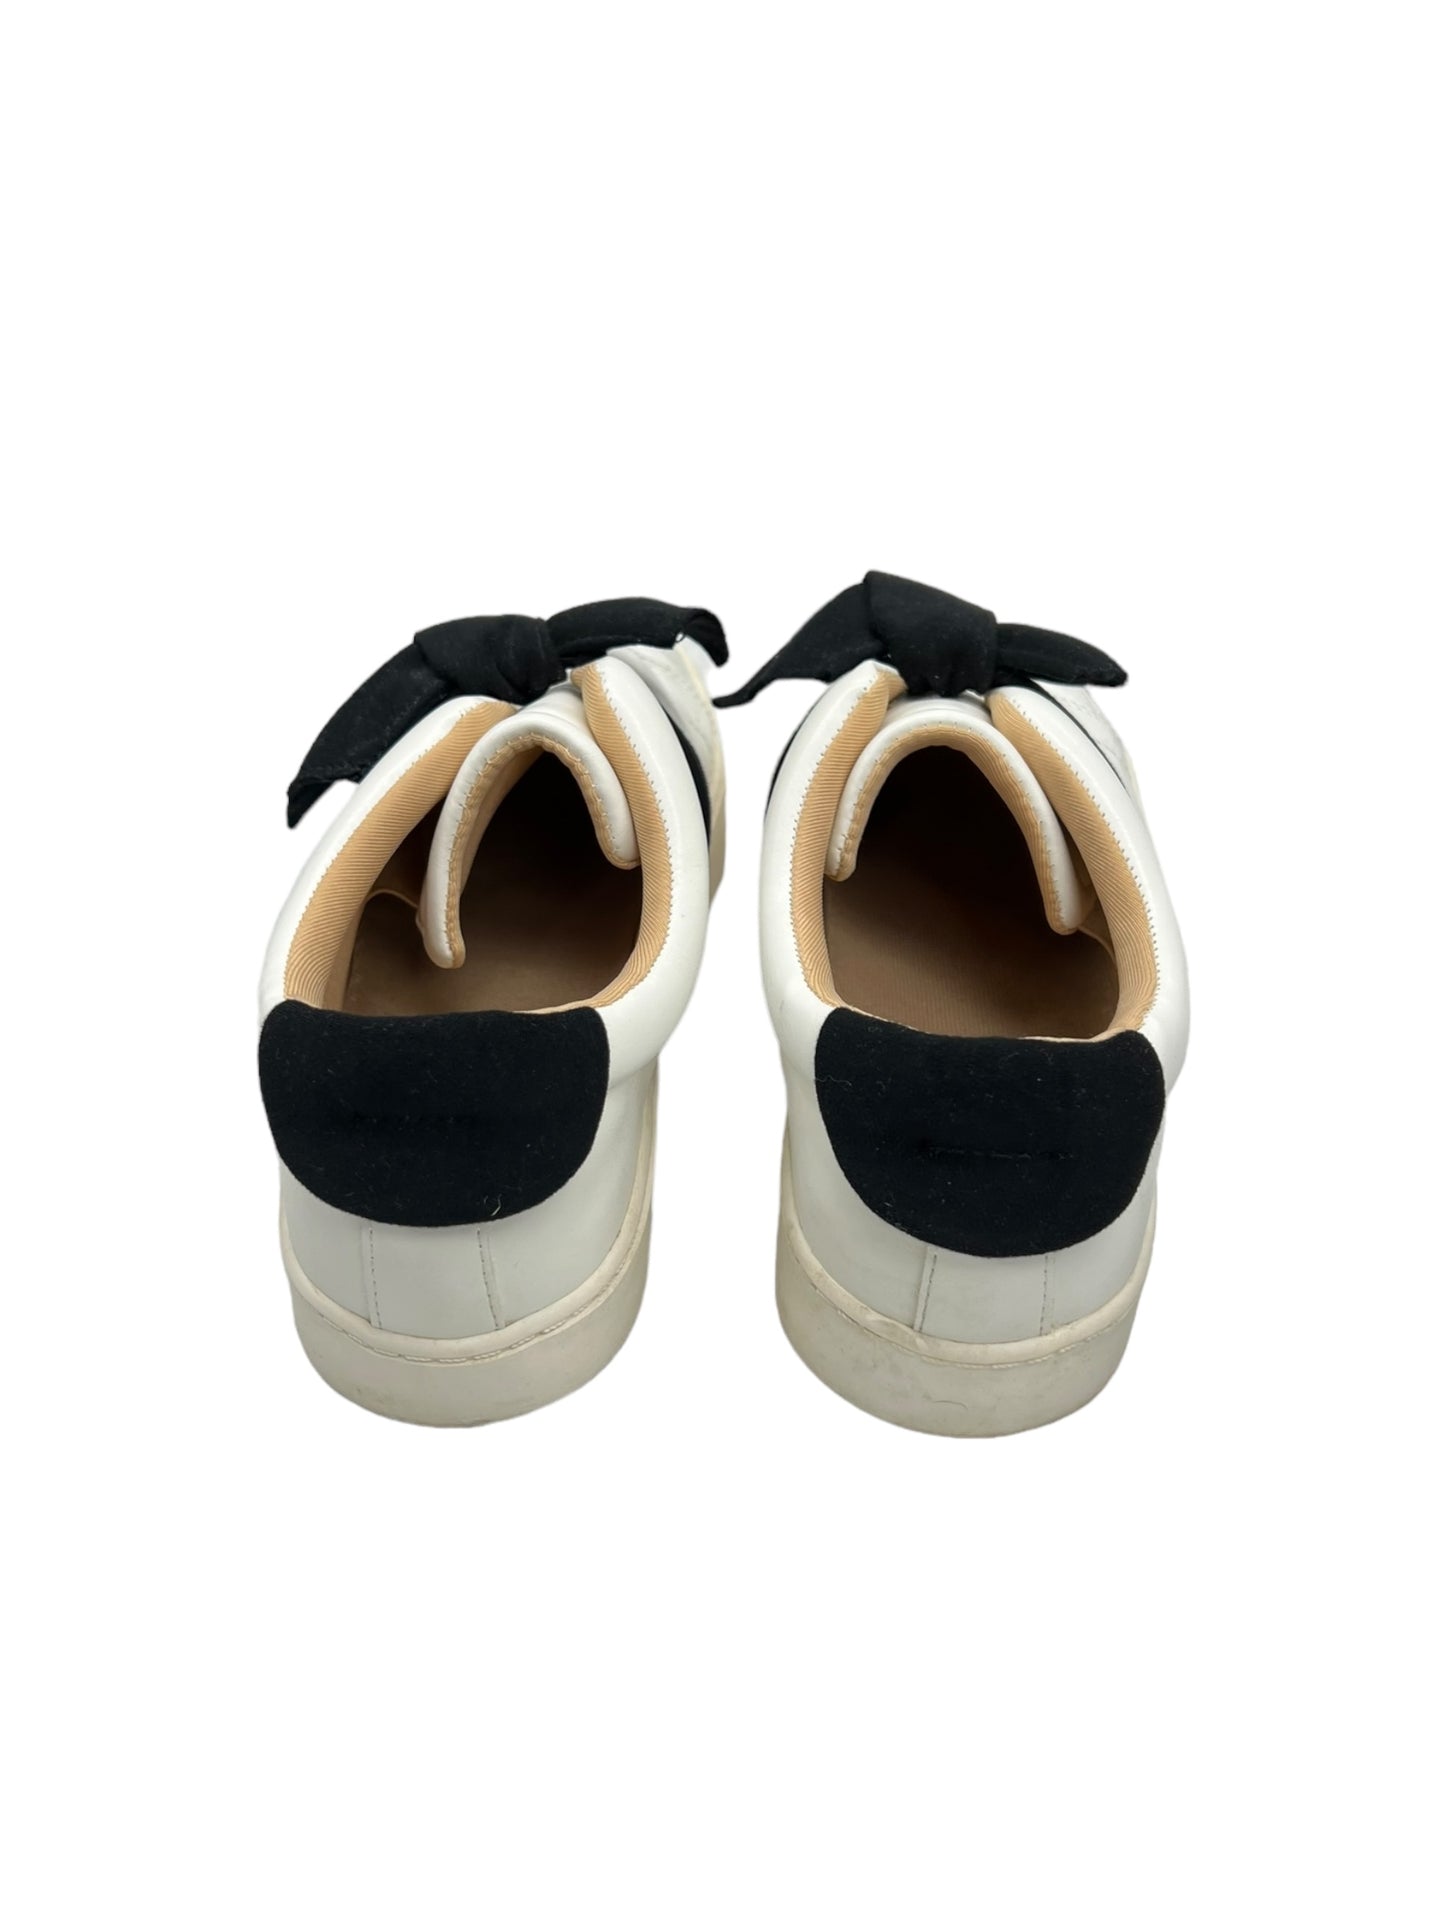 Shoes Sneakers By Journee  Size: 8.5